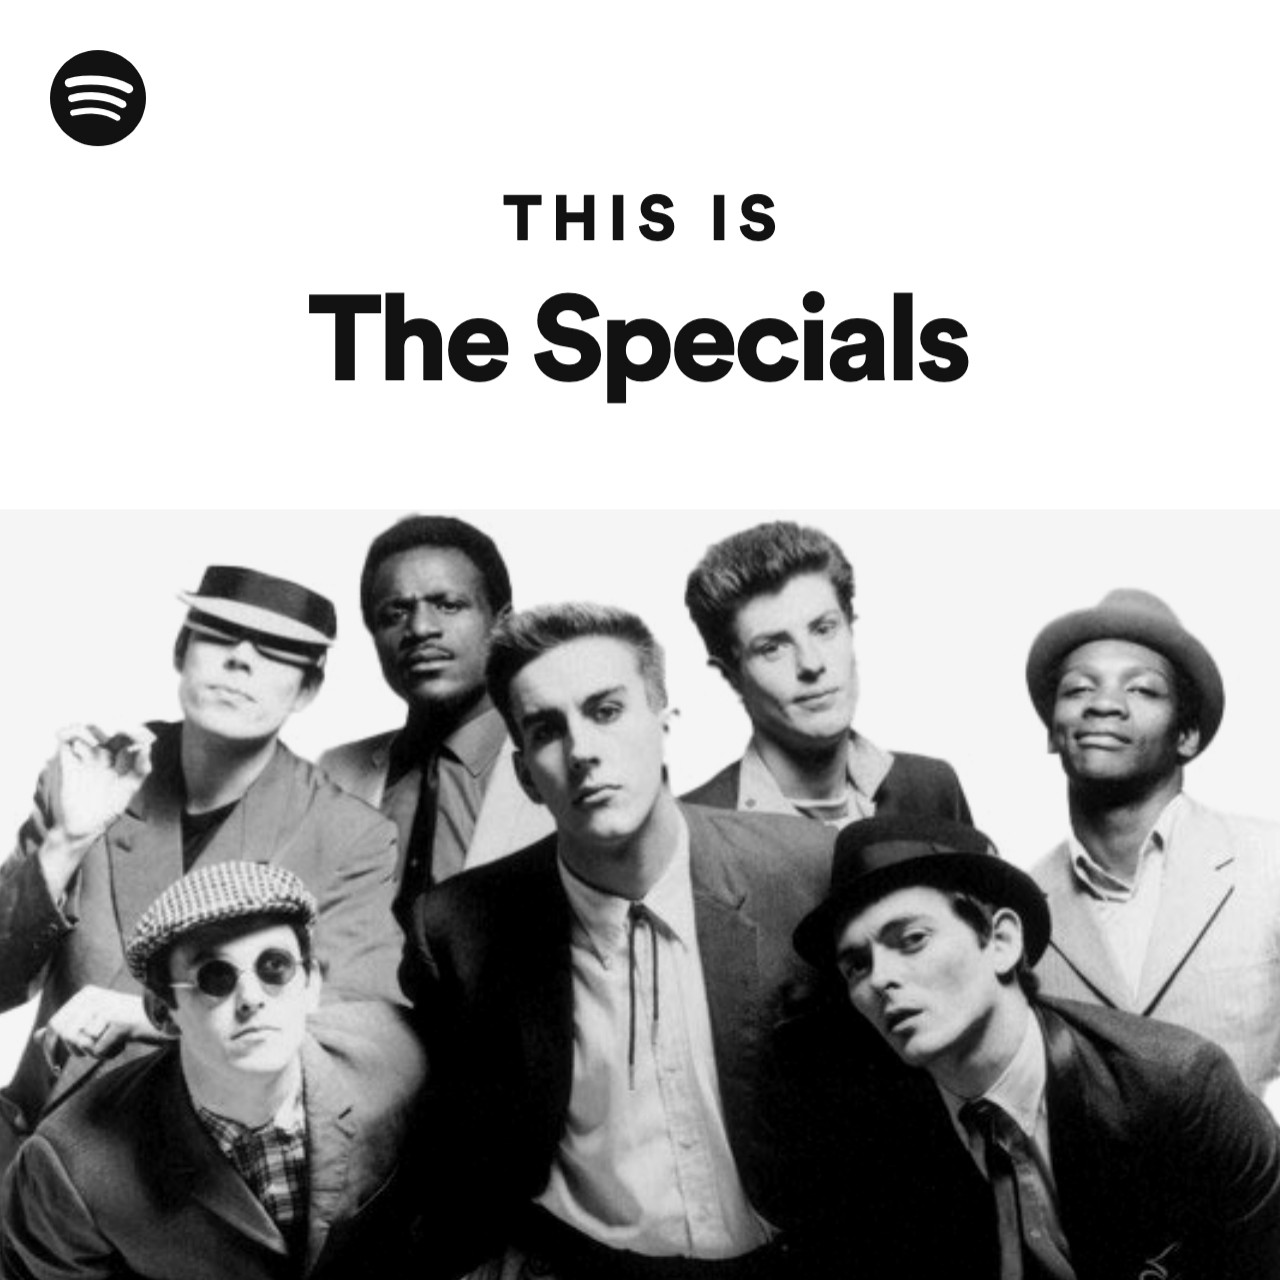 This Is The Specials